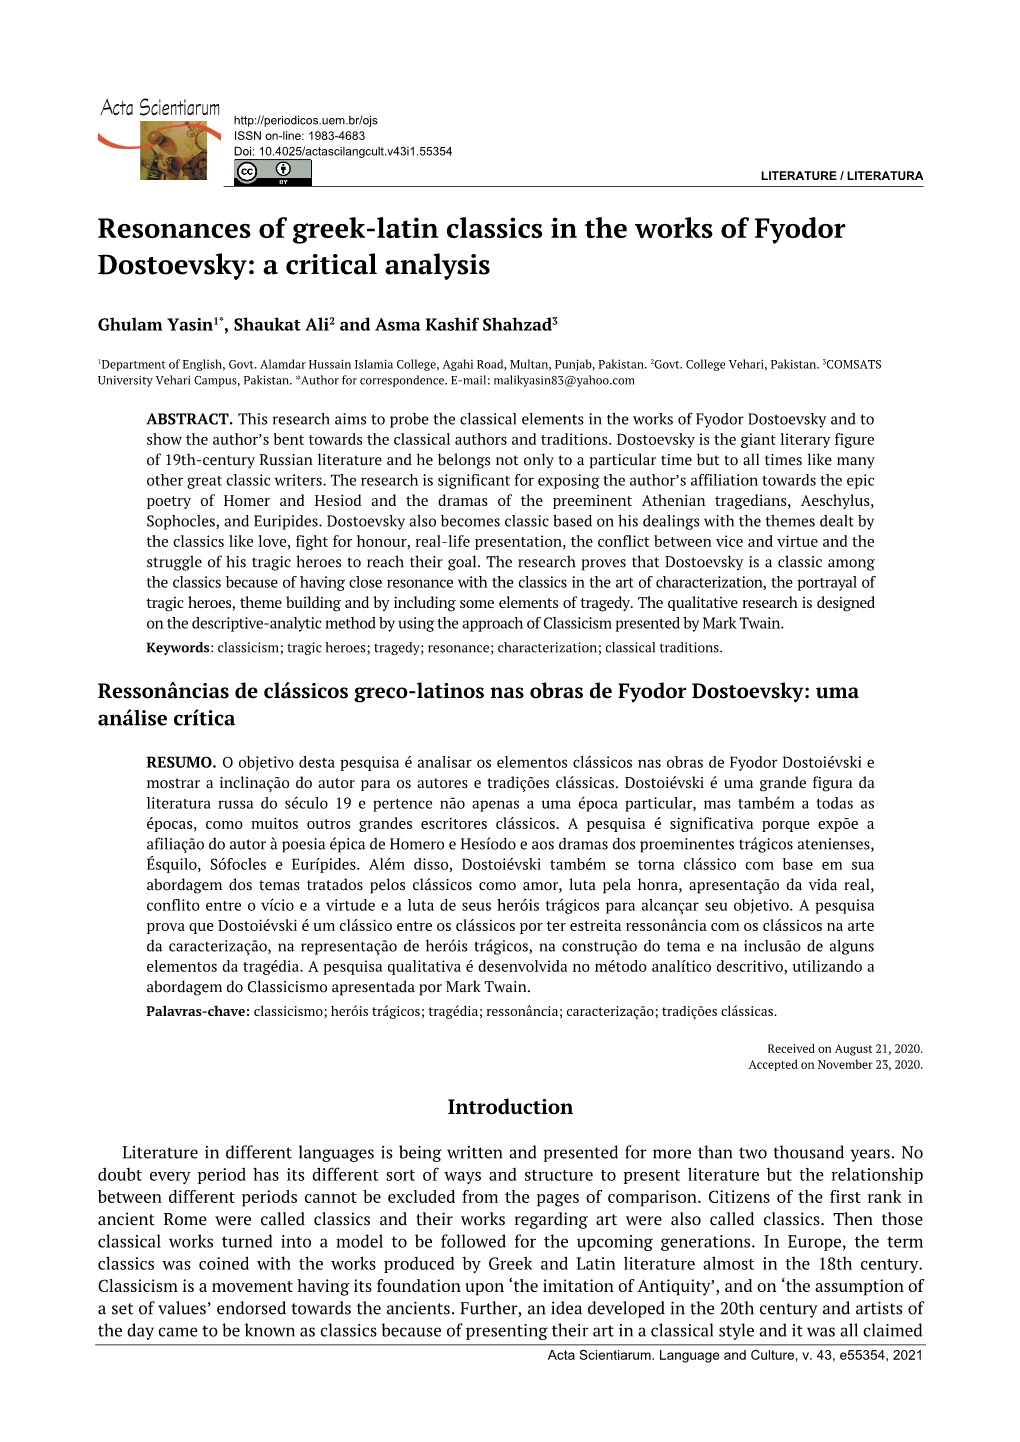 Resonances of Greek-Latin Classics in the Works of Fyodor Dostoevsky: a Critical Analysis